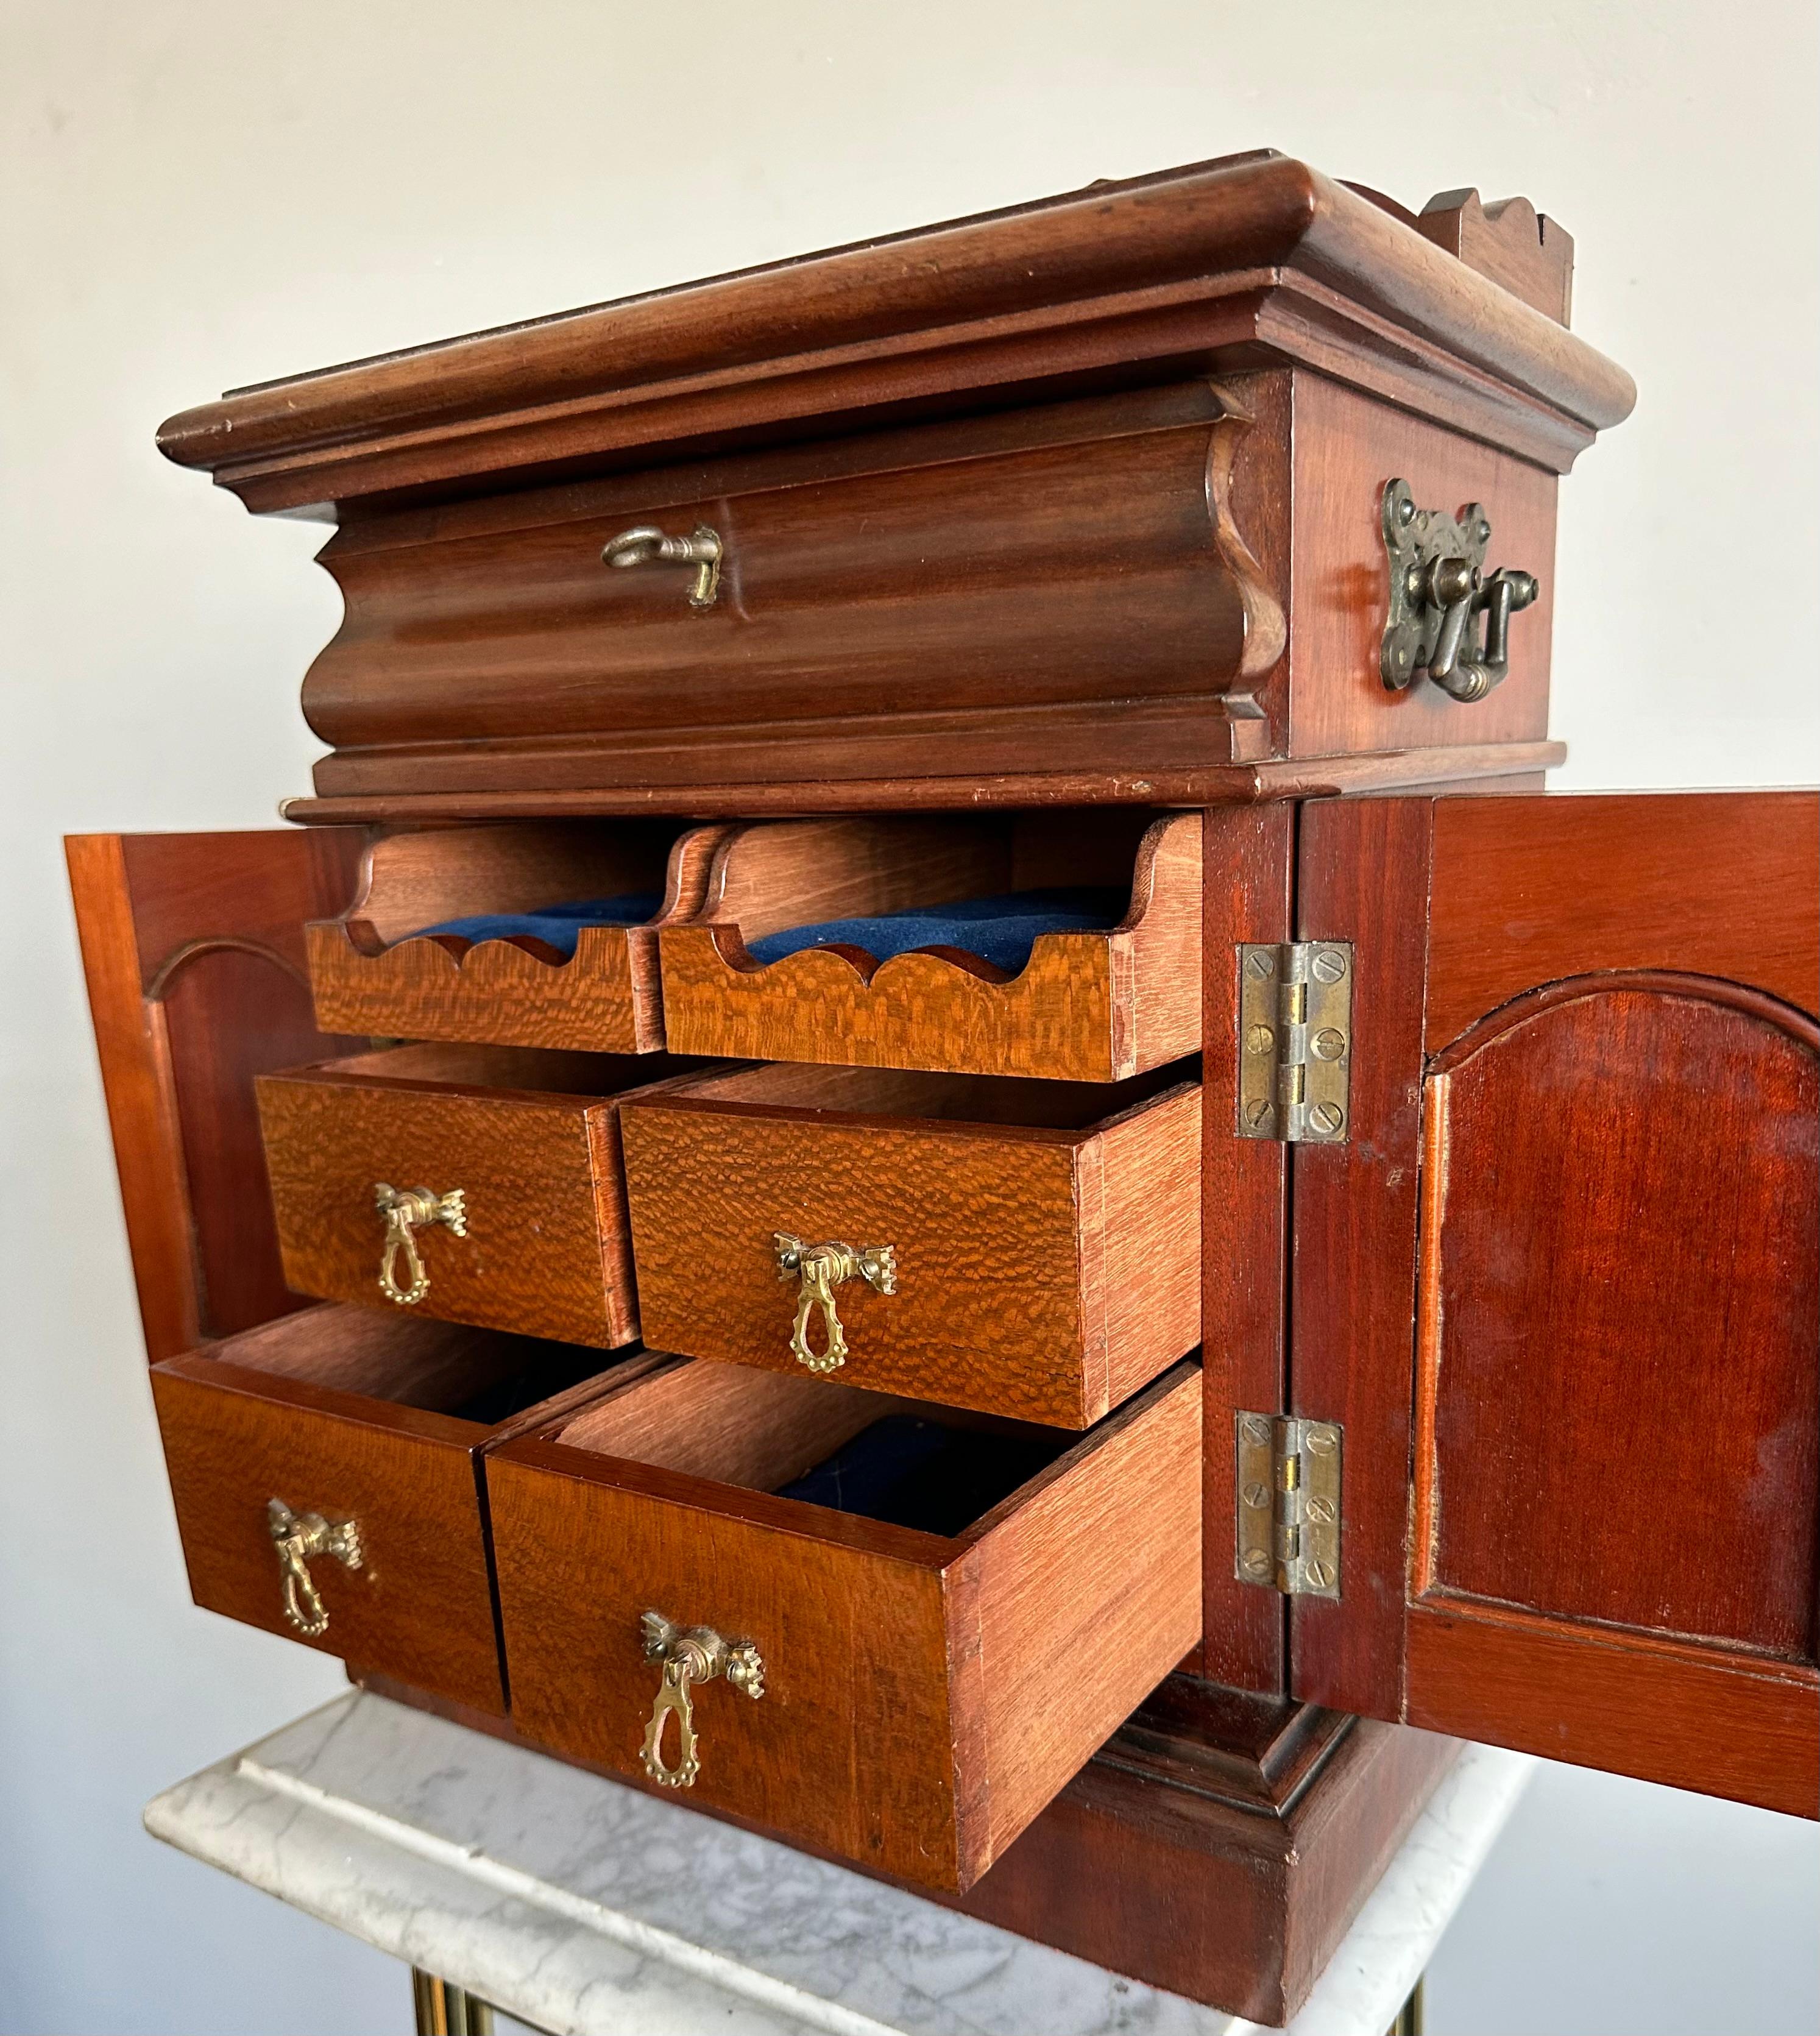 Hand-Carved Top Quality 19th Century Jewelry, Treasure Box, Cabinet w Drawers & Mirror Doors For Sale